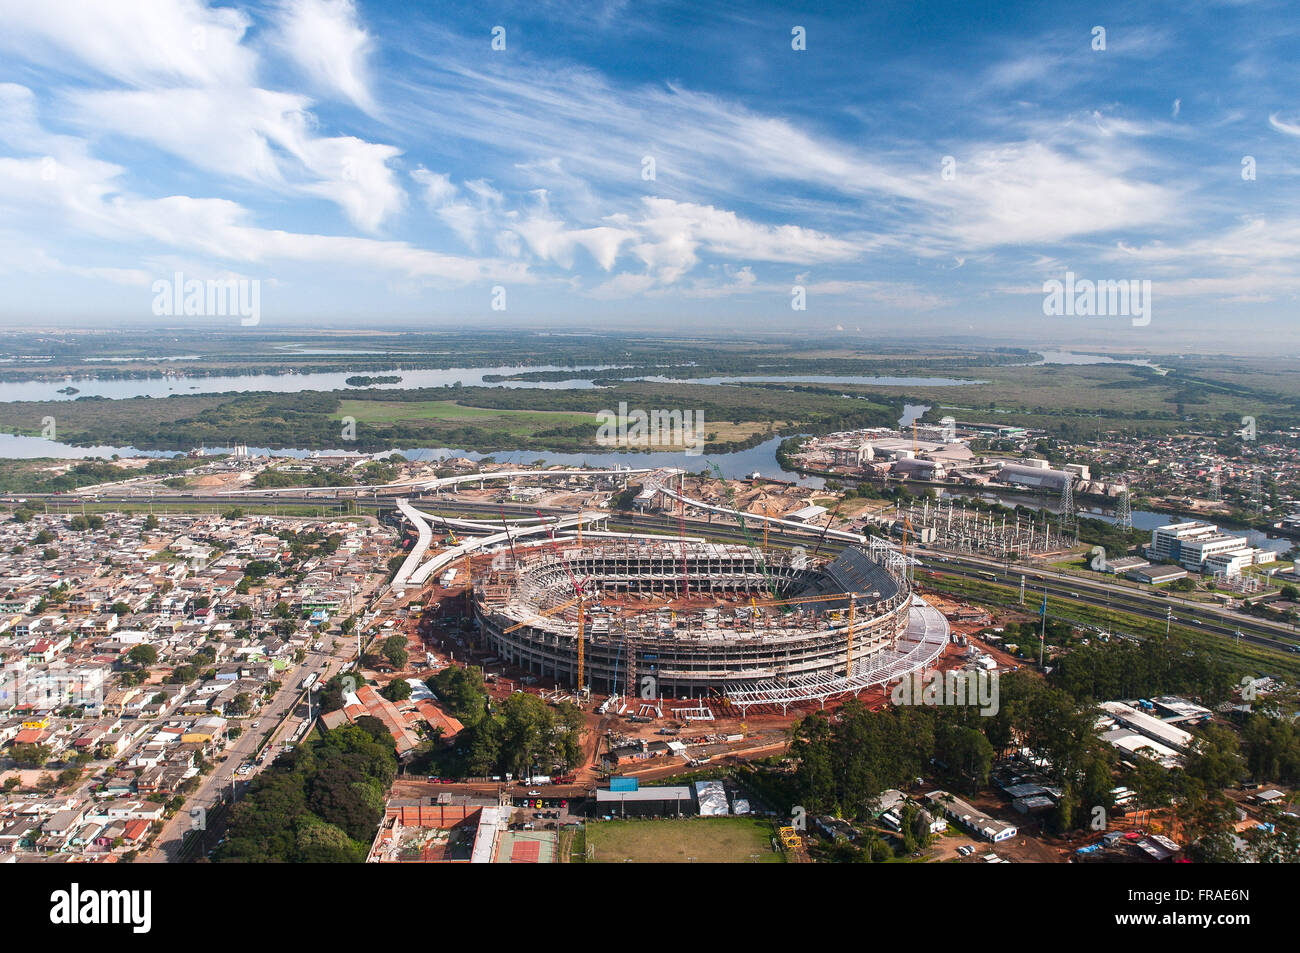 Aerial view of construction of multipurpose arena complex Gremio and city Stock Photo